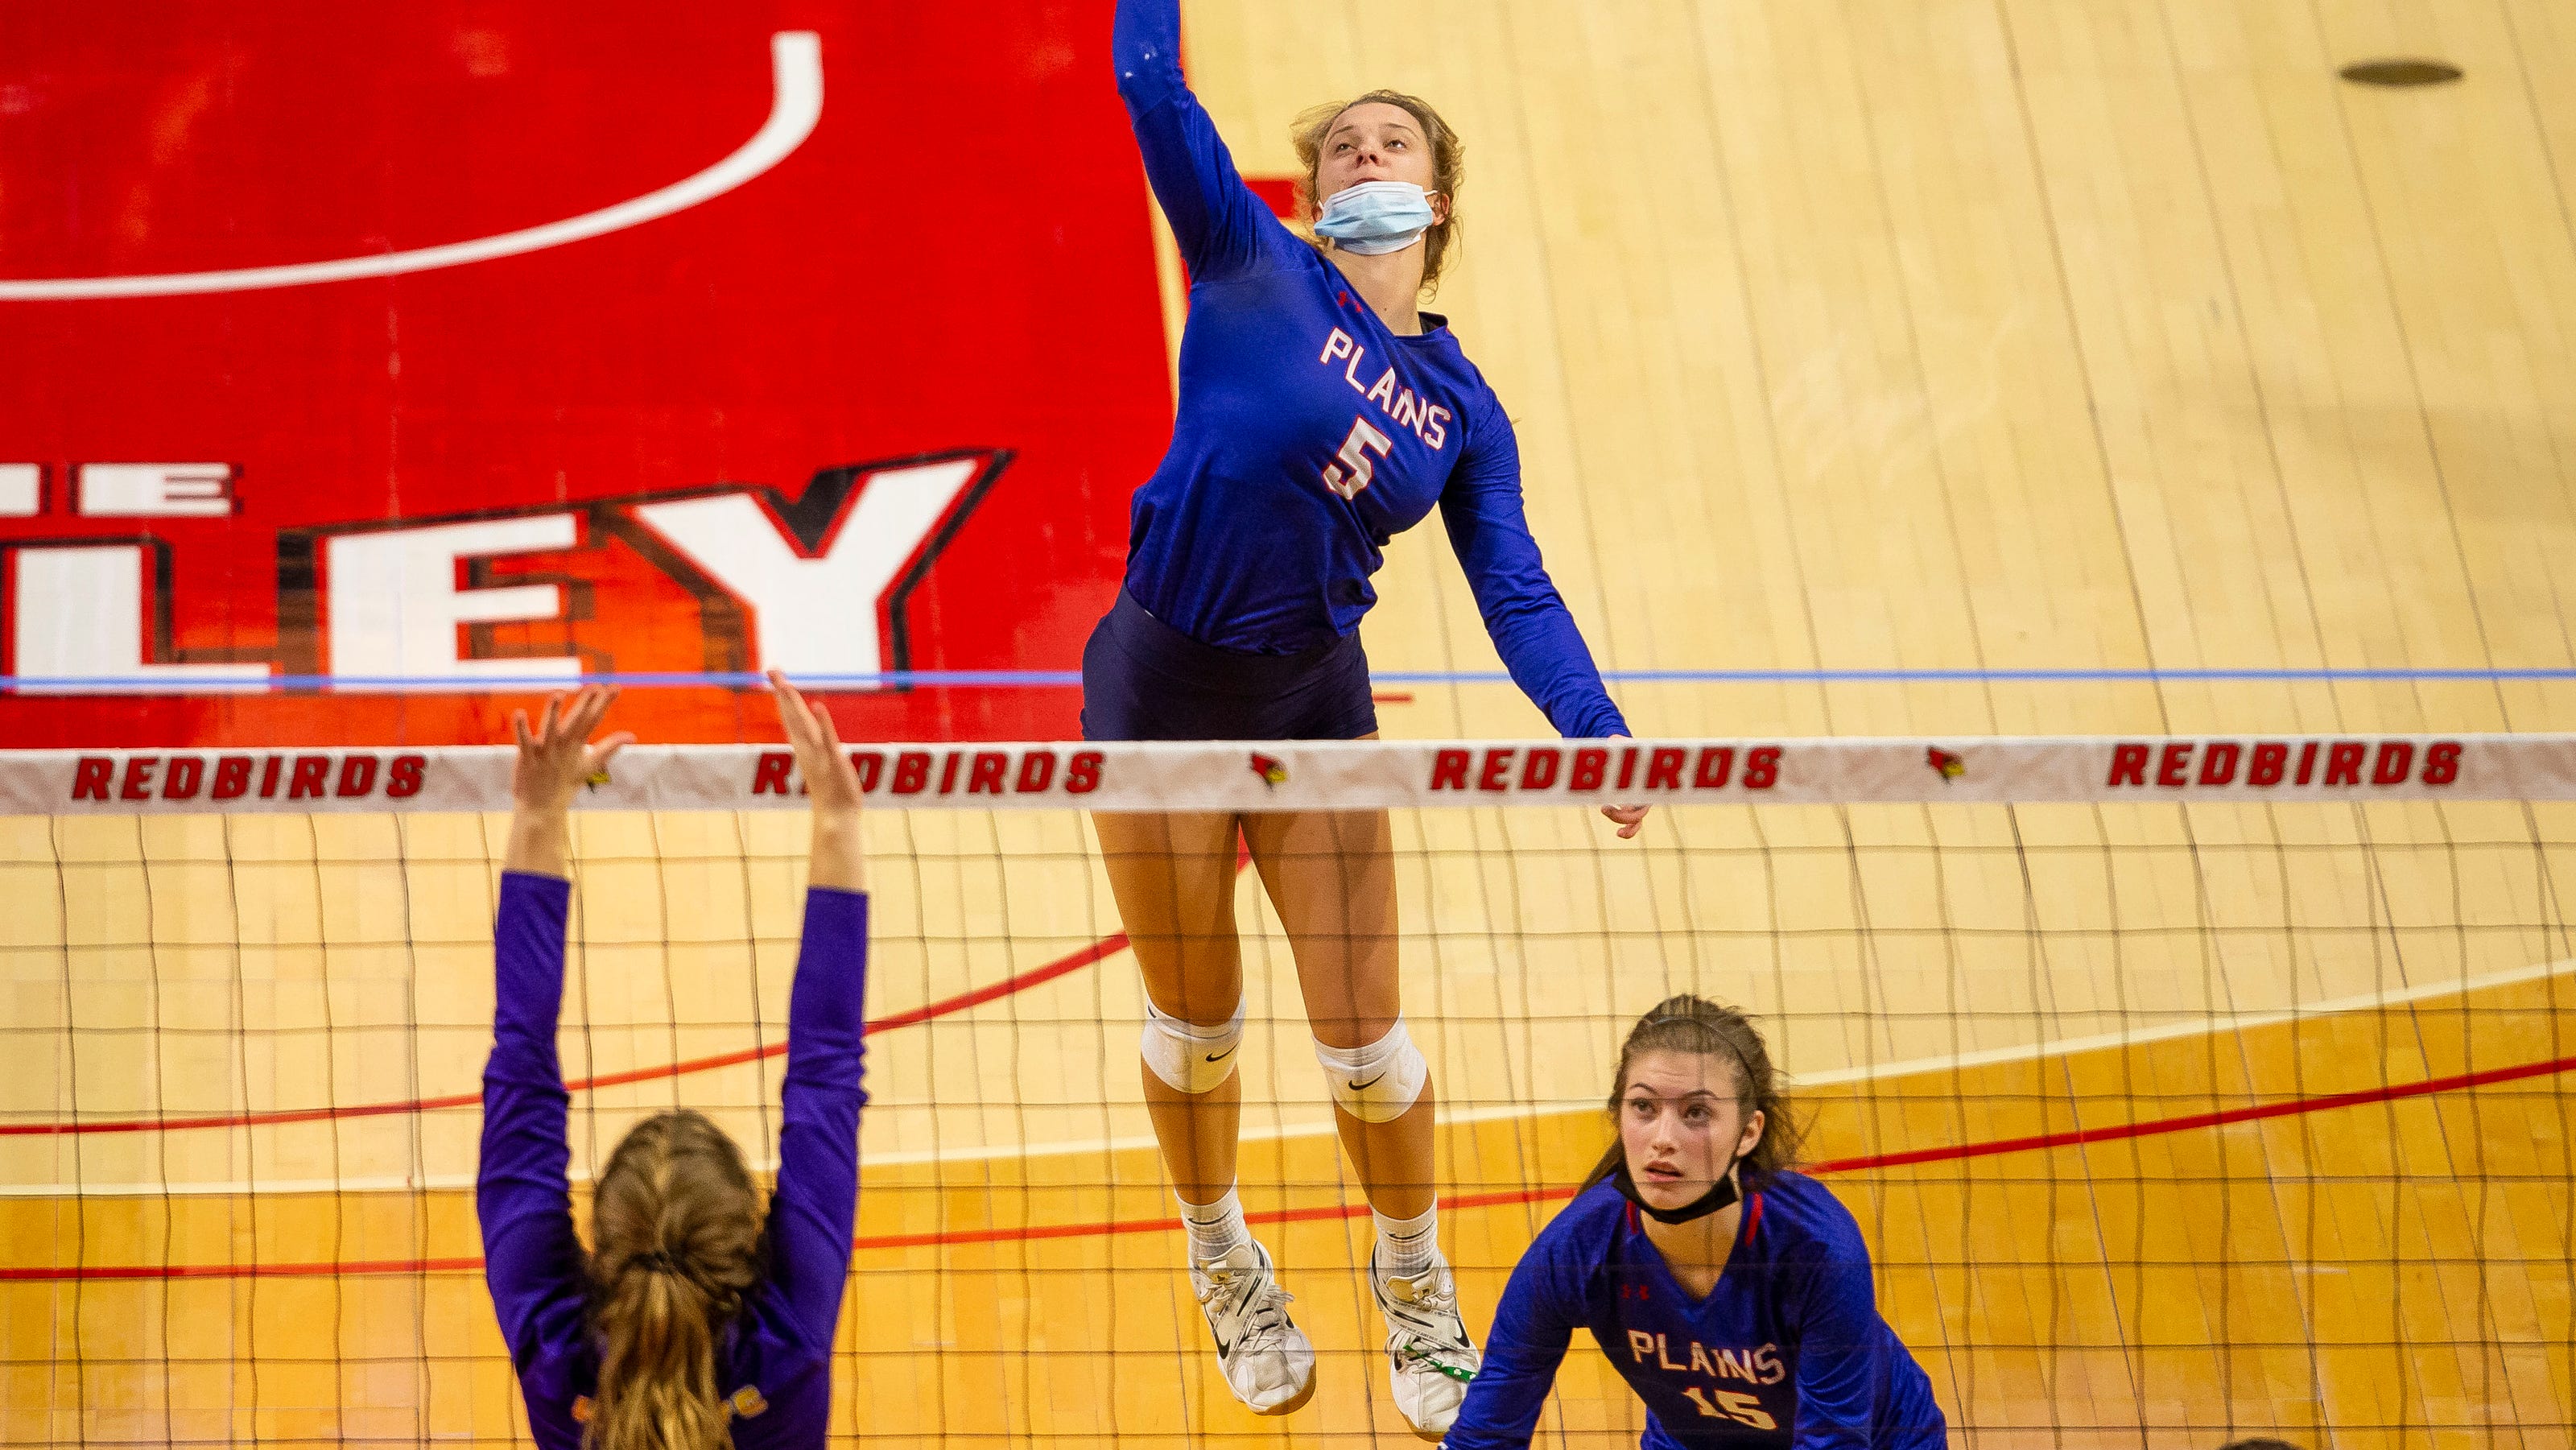  Four times the fun: Plains, Williamsville win to set up another volleyball showdown 